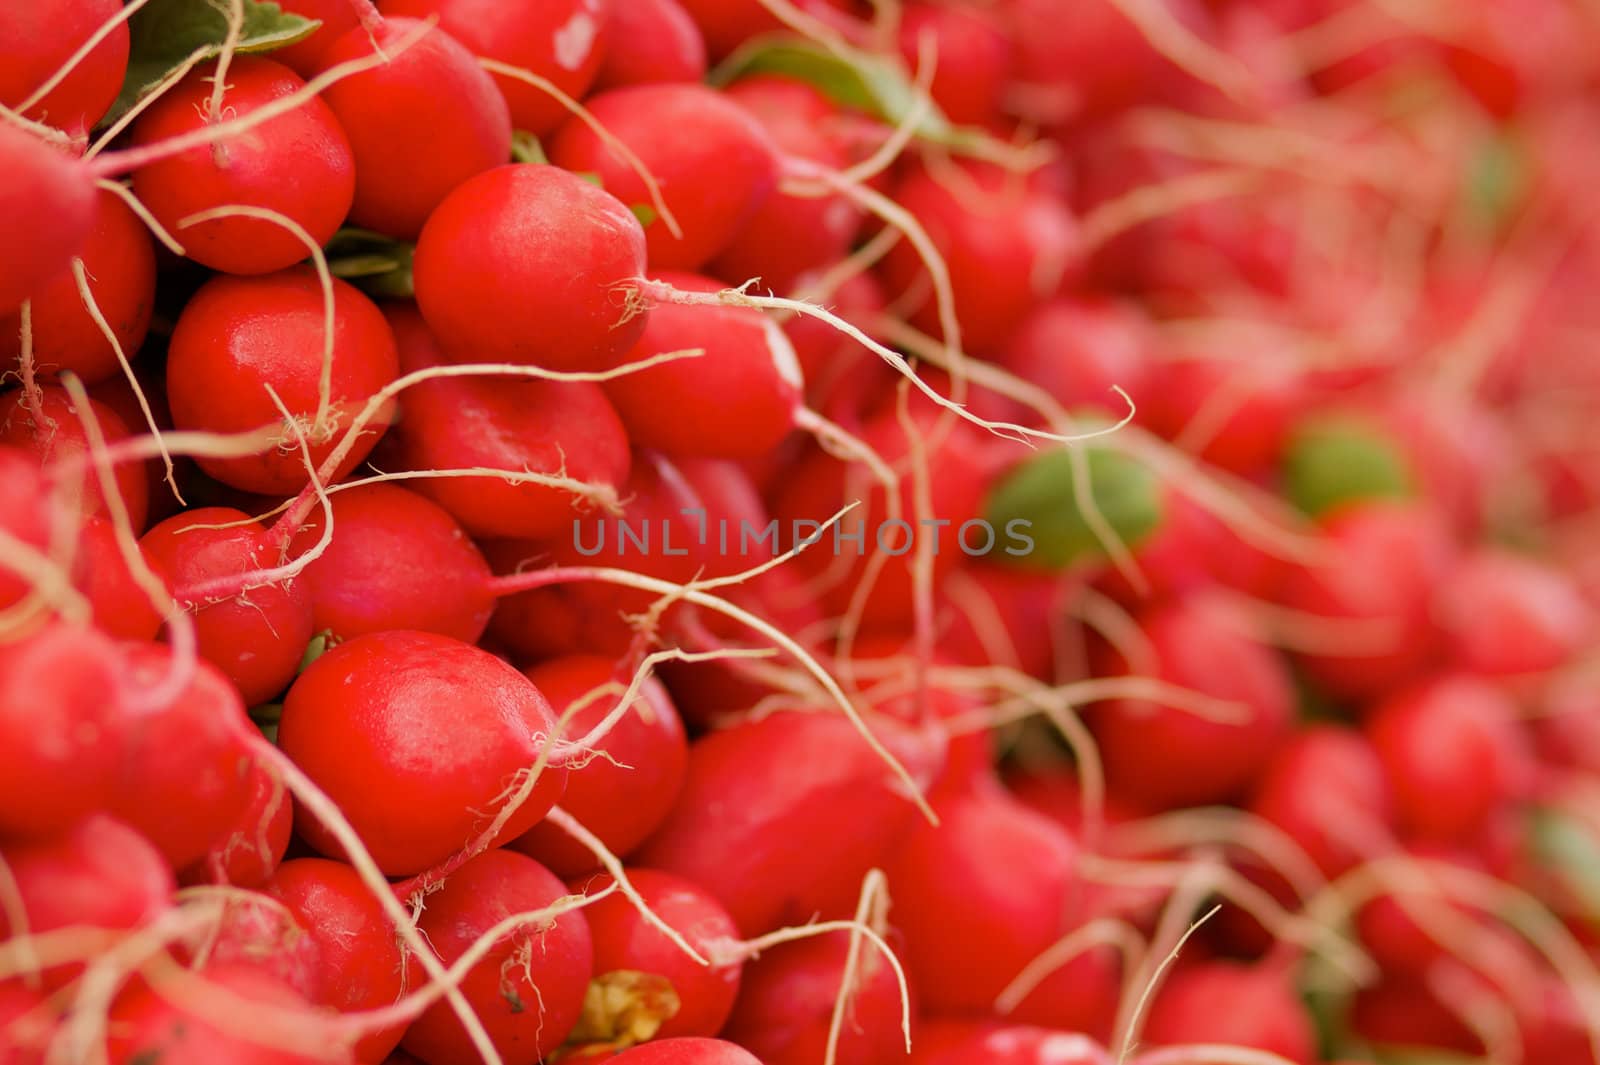 Pile of red radishes at the farmers market